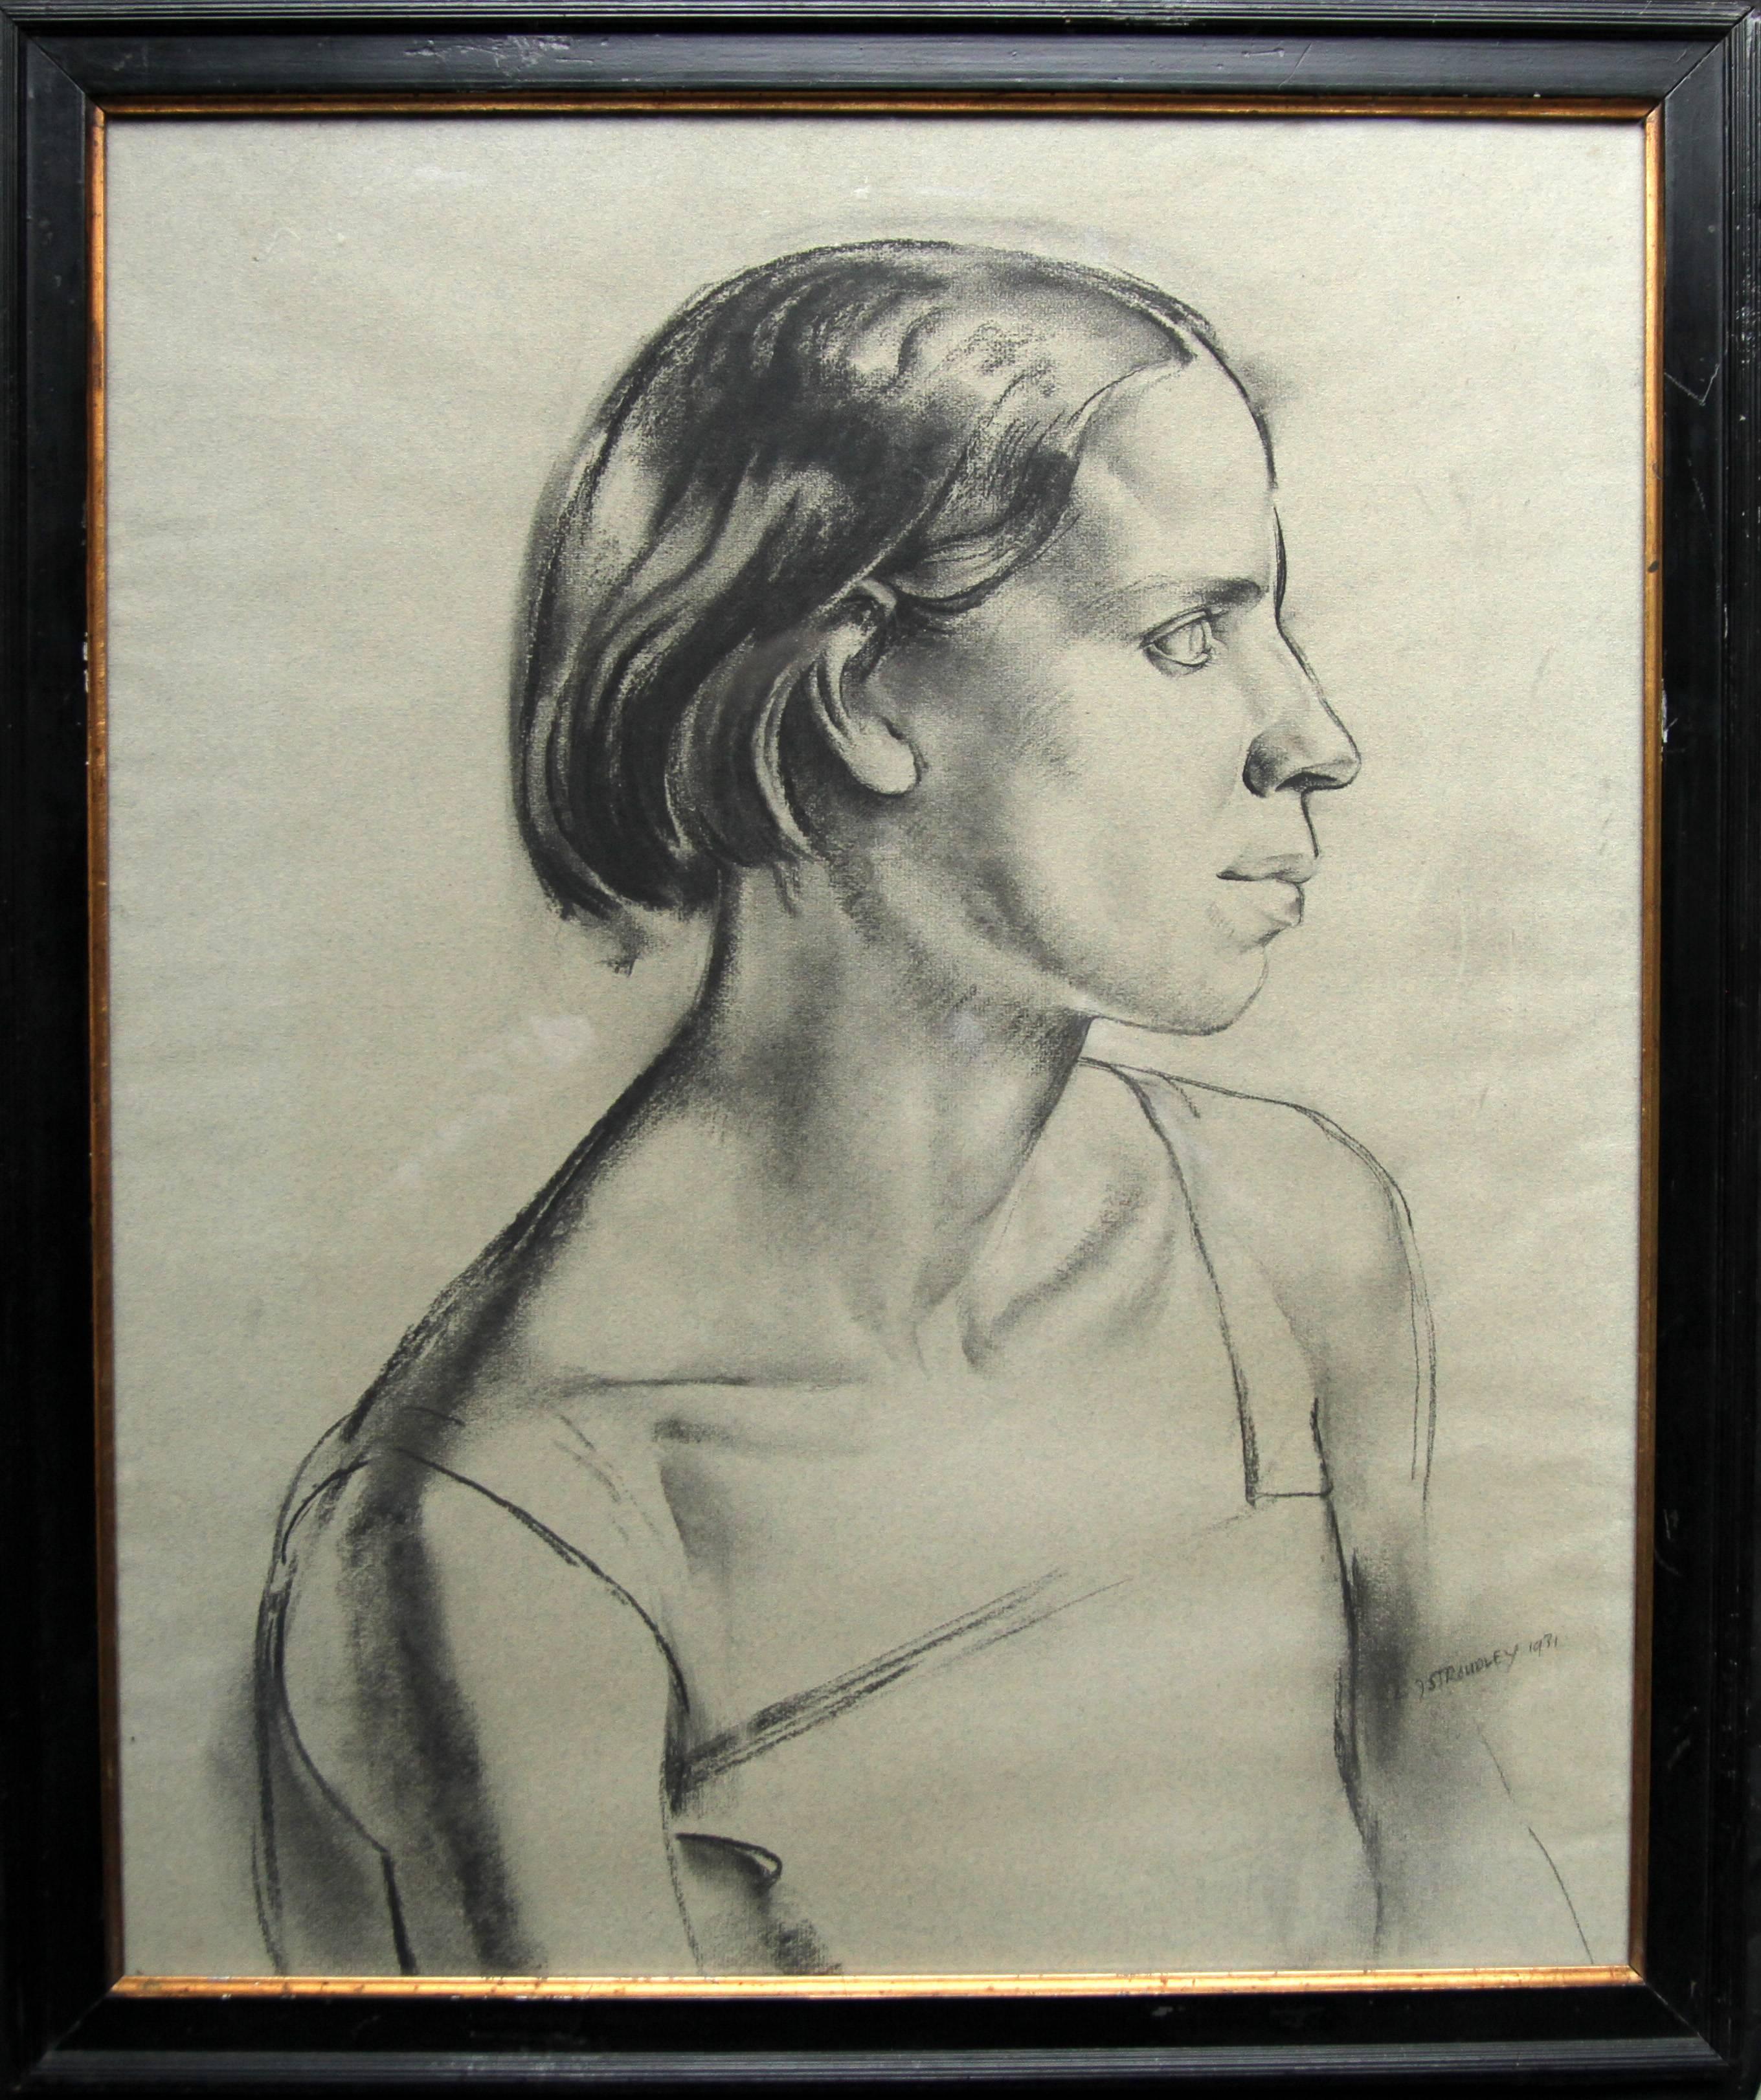 A fine large charcoal and pencil drawing by British listed artist James Stroudley. Executed in 1931, it is a stunning example of a 1930s Art Deco portrait. Very strong and bold, it depicts a portrait of a young woman. It is very evocative and in